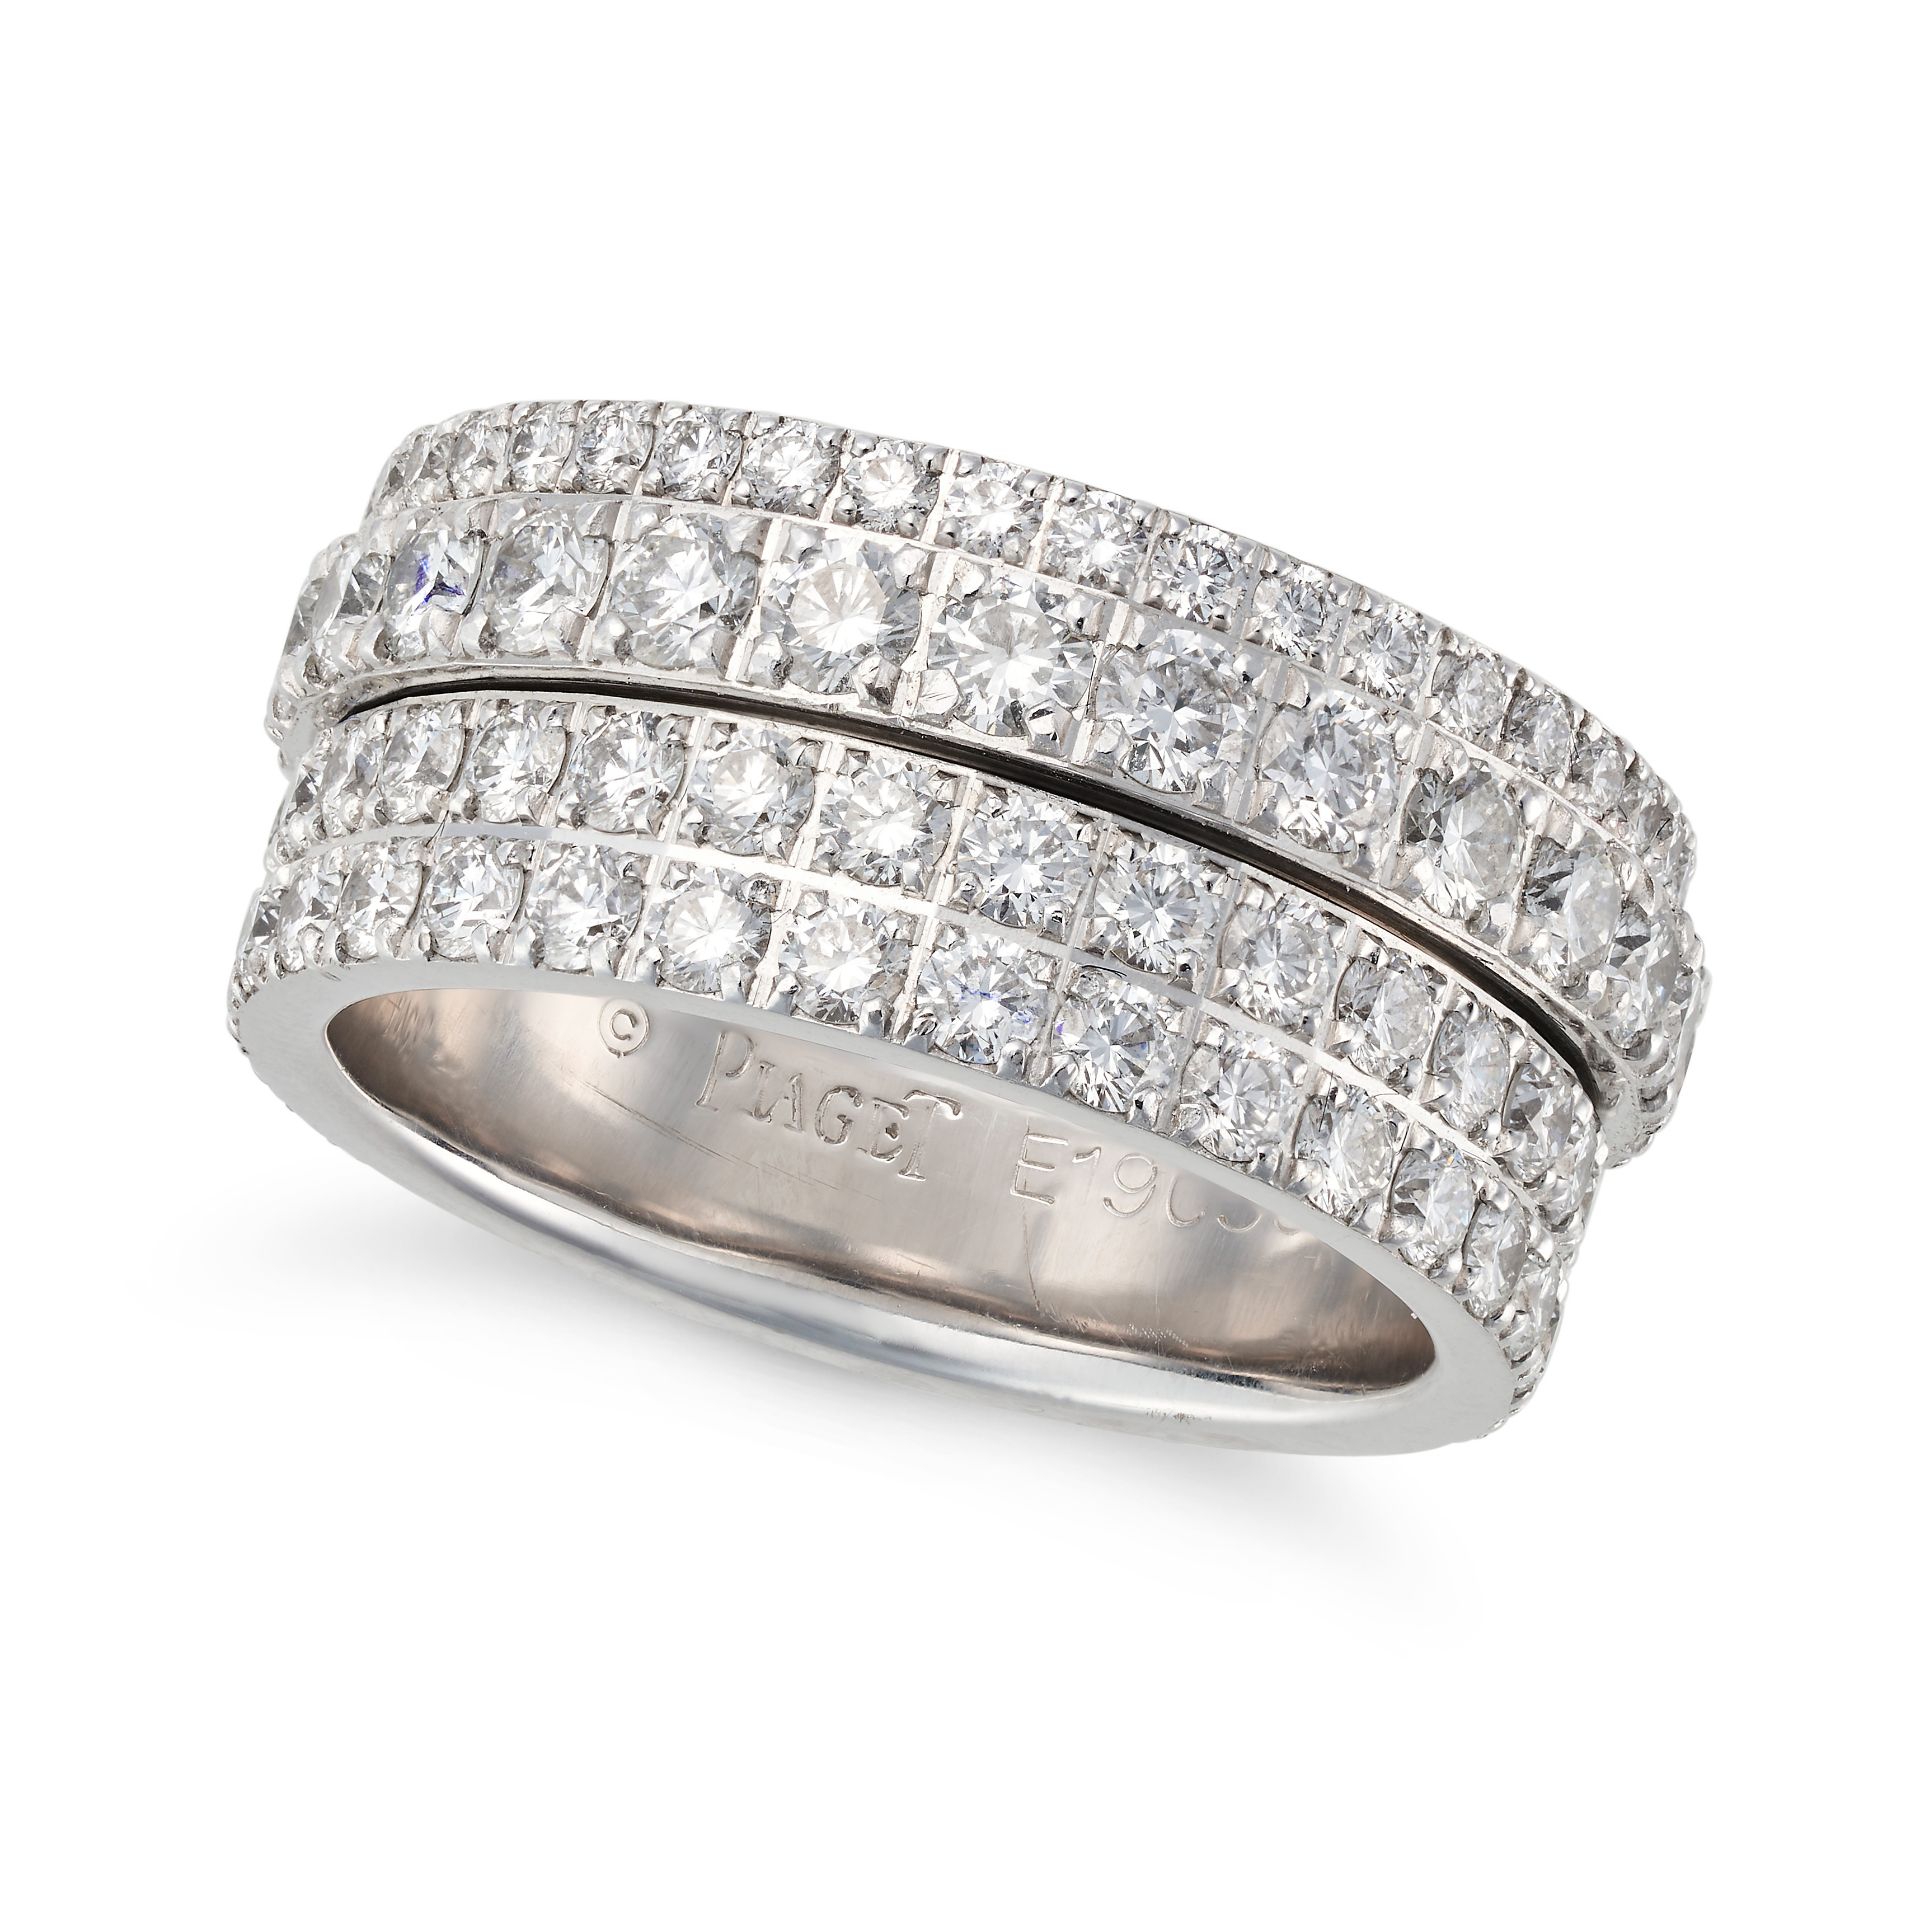 PIAGET, A DIAMOND POSSESSION RING set all around with four rows of round brilliant cut diamonds, ... - Image 2 of 2